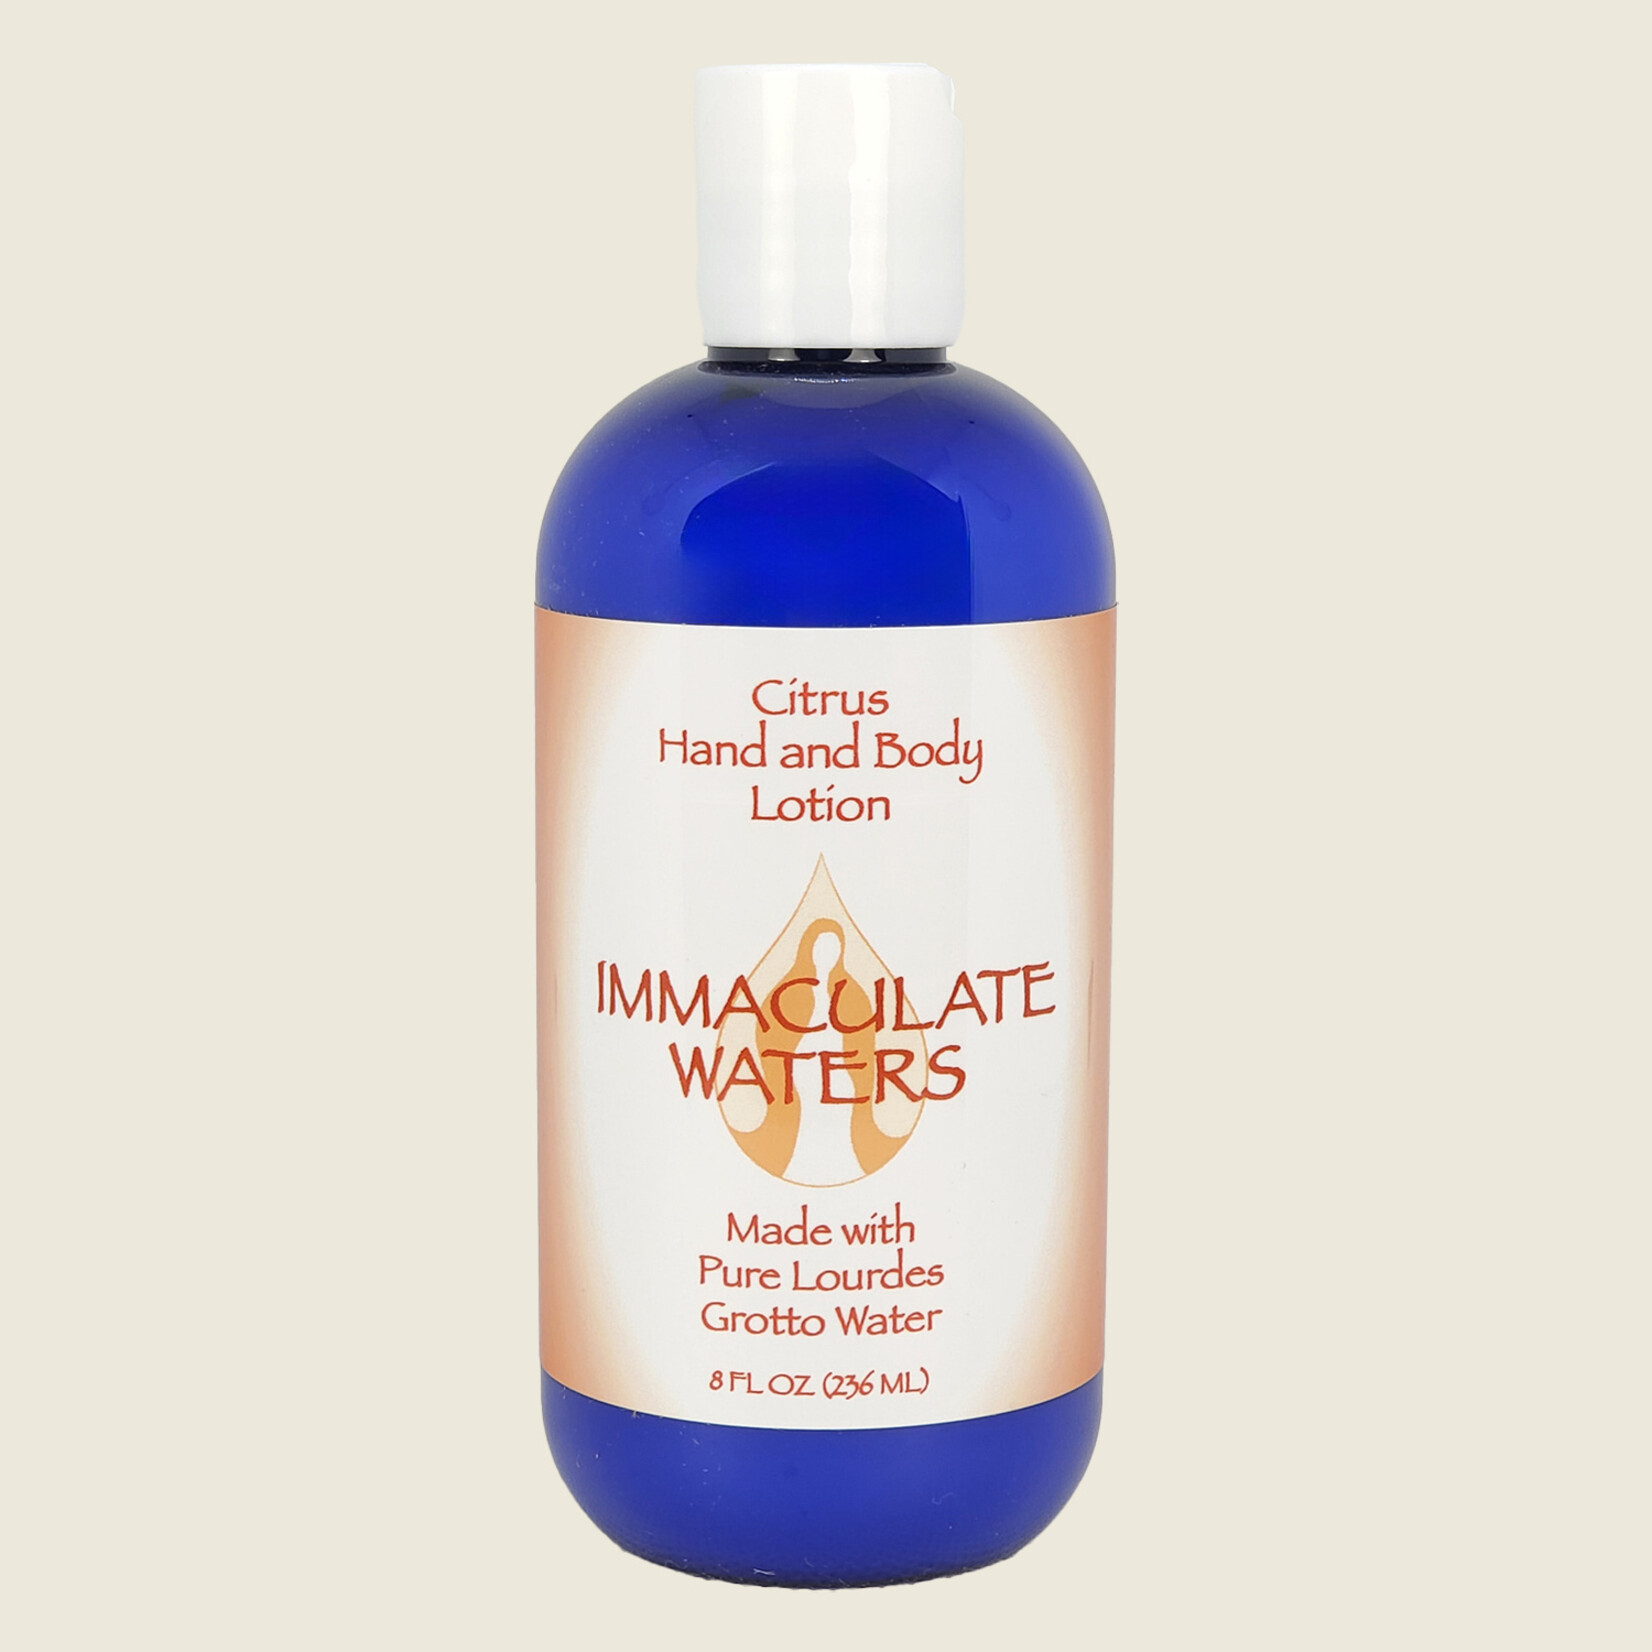 Citrus - Immaculate Waters Citrus Hand And Body Lotion